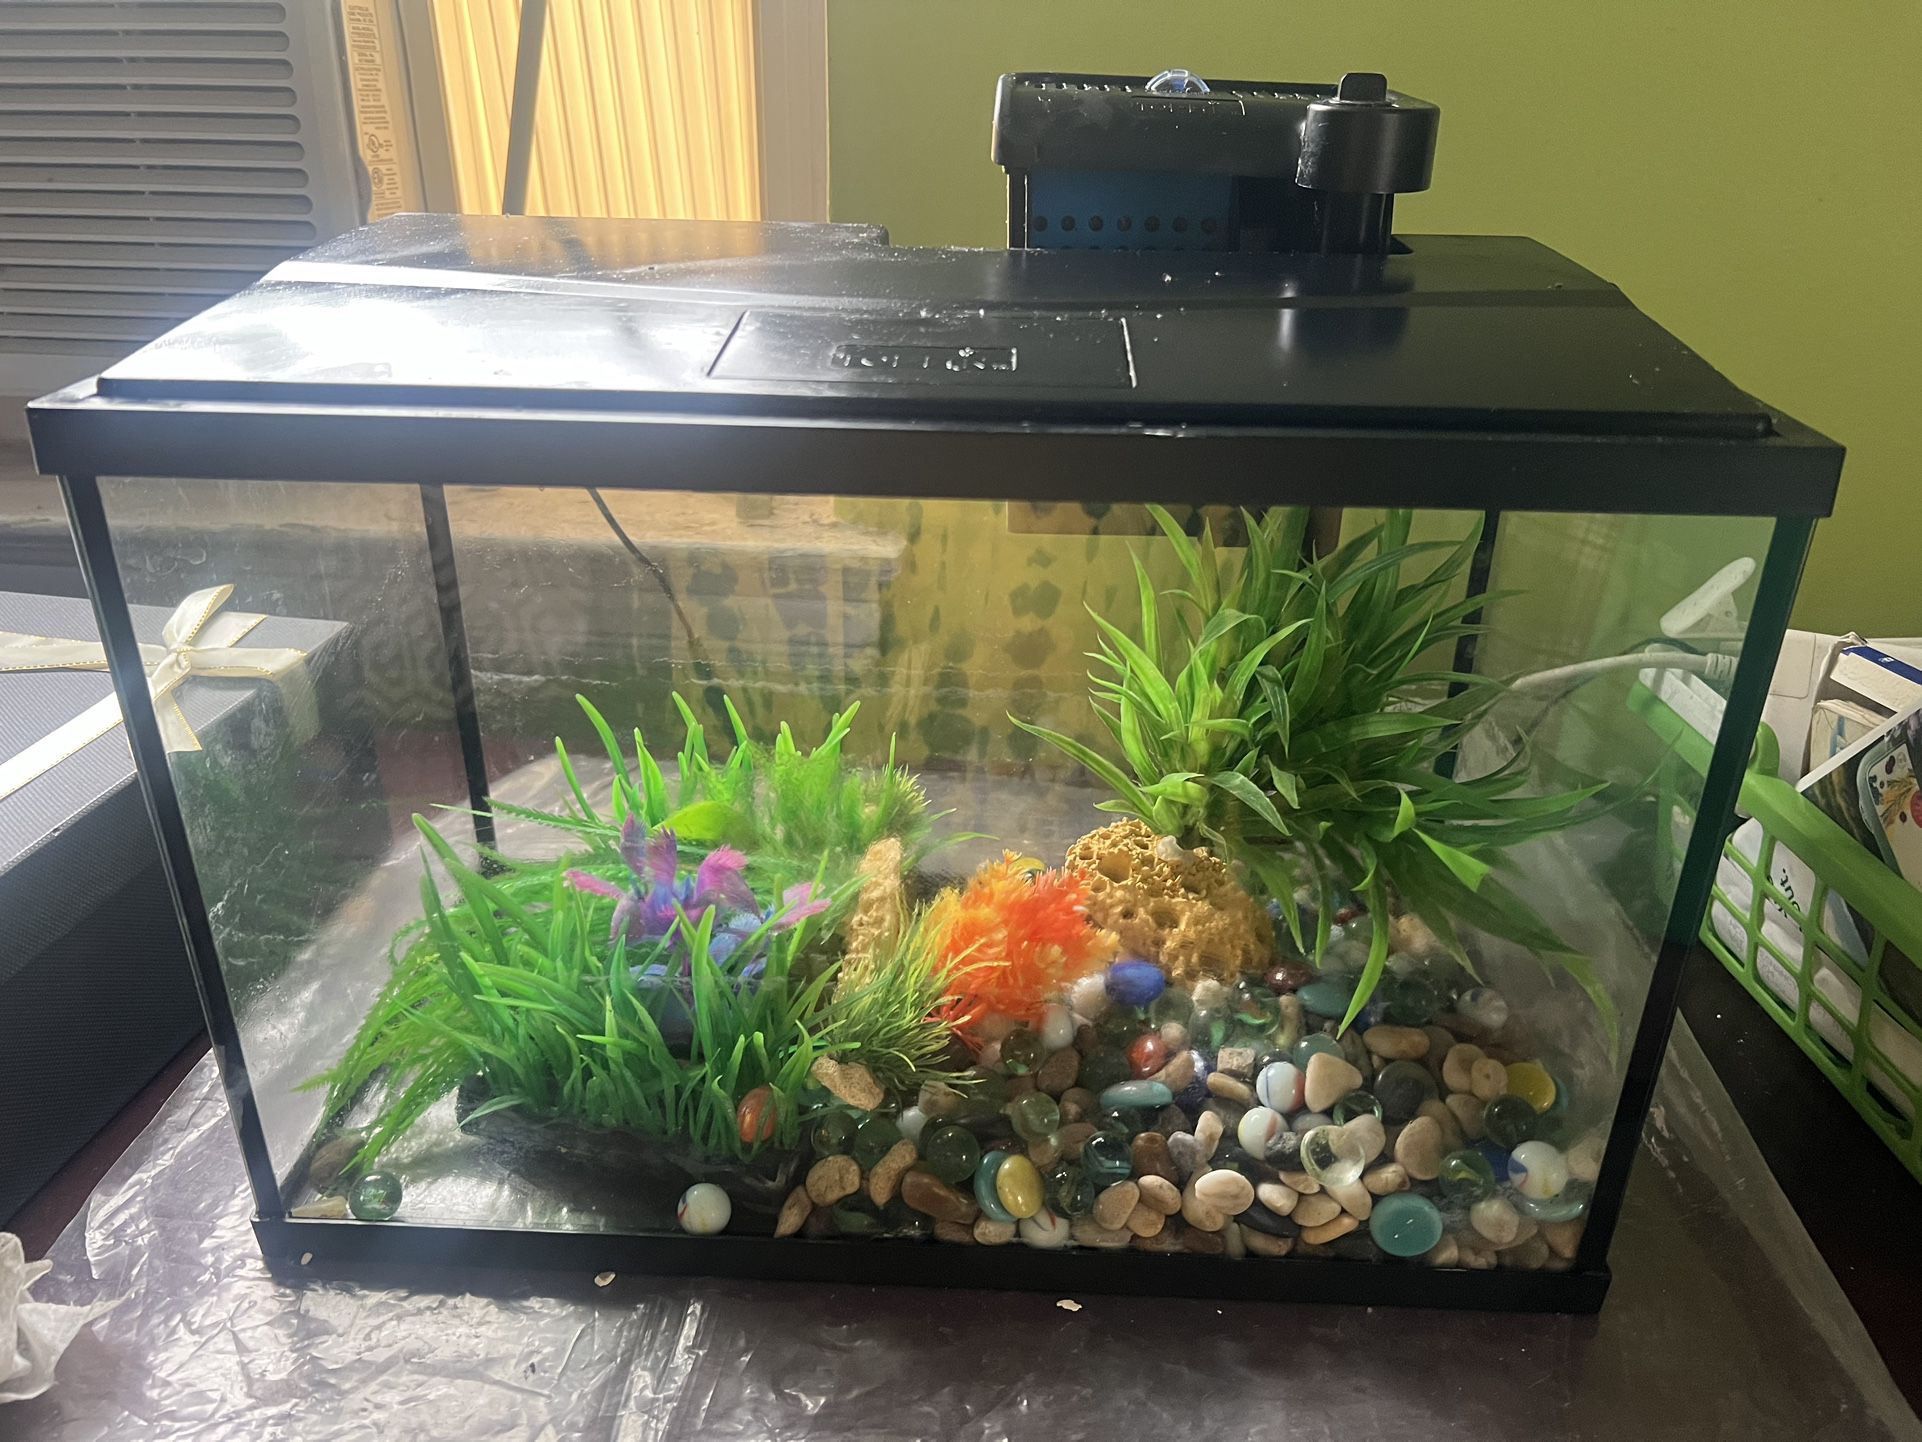 Fish tank with filter and ornaments